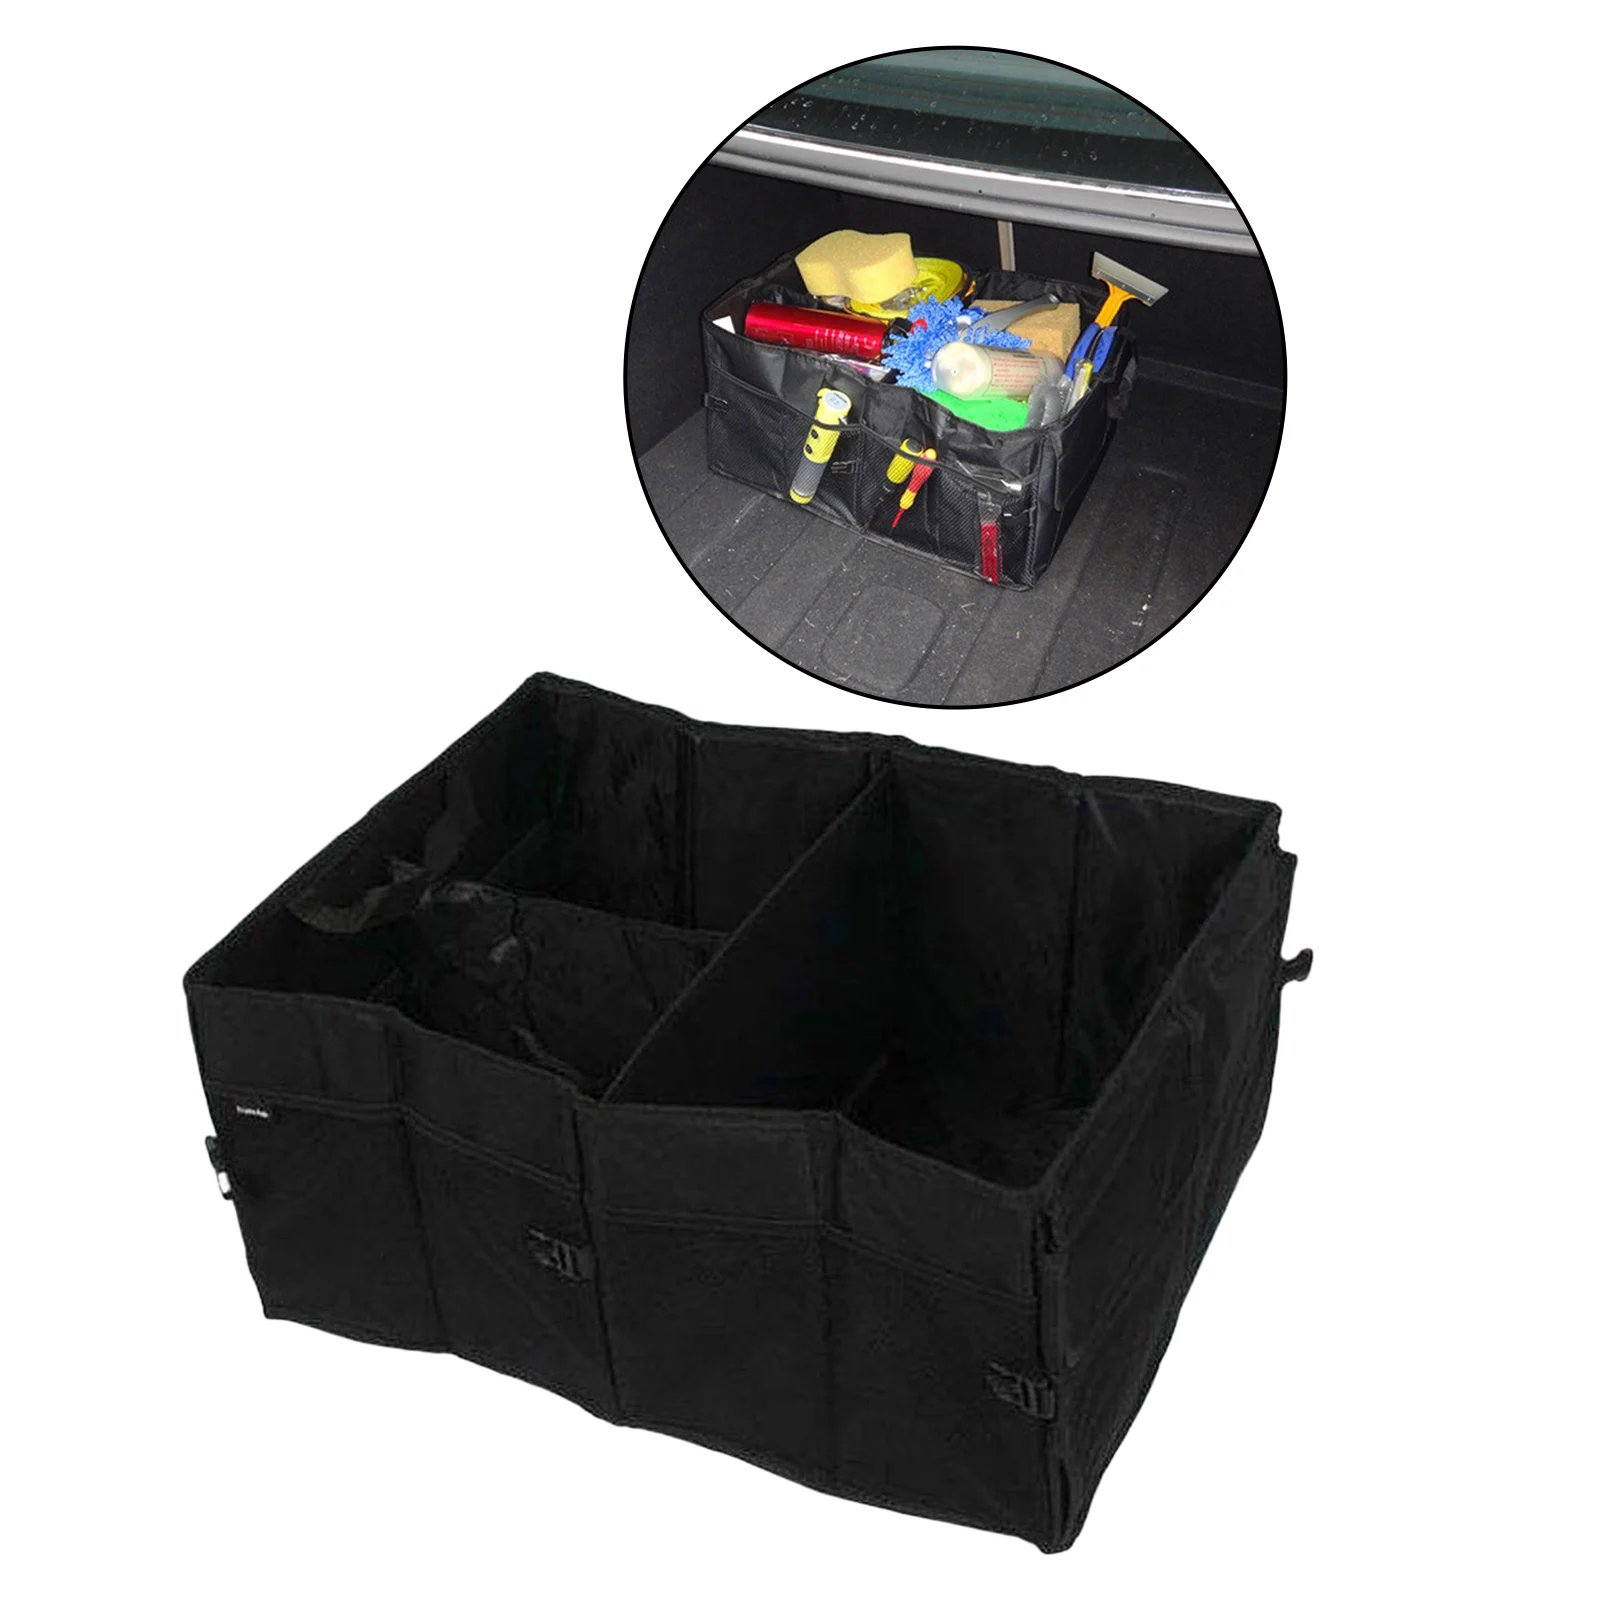 Car Boot Organiser Foldable Storage Bag, Non Slip, Super Large Capacity, for Business or Solo Travel